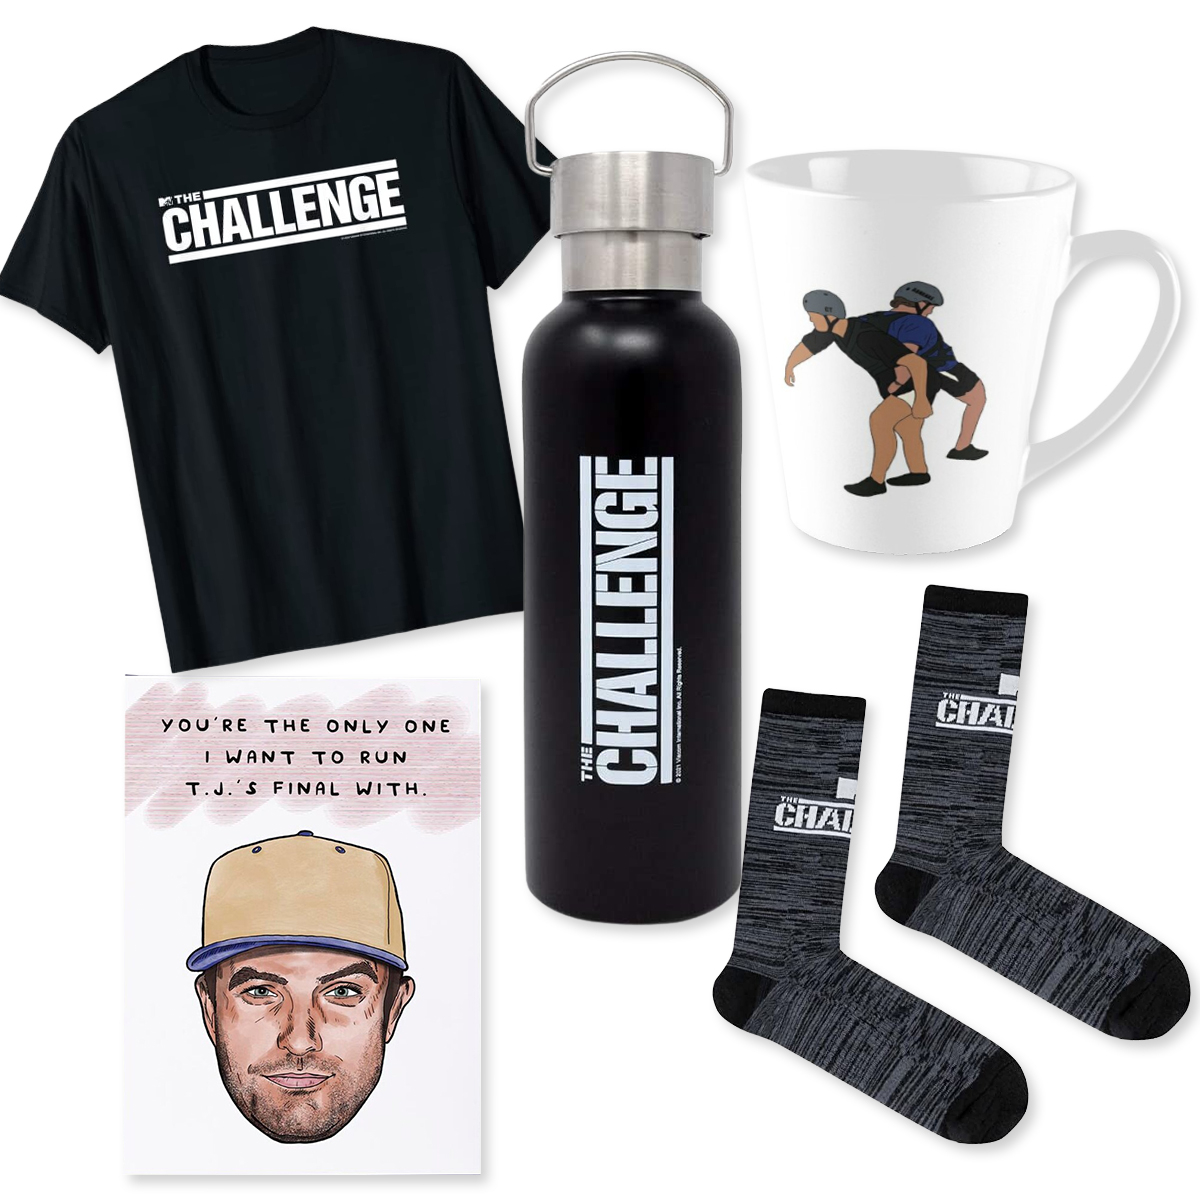 Feel Like a Champ With This Gift Guide for The Challenge Fans